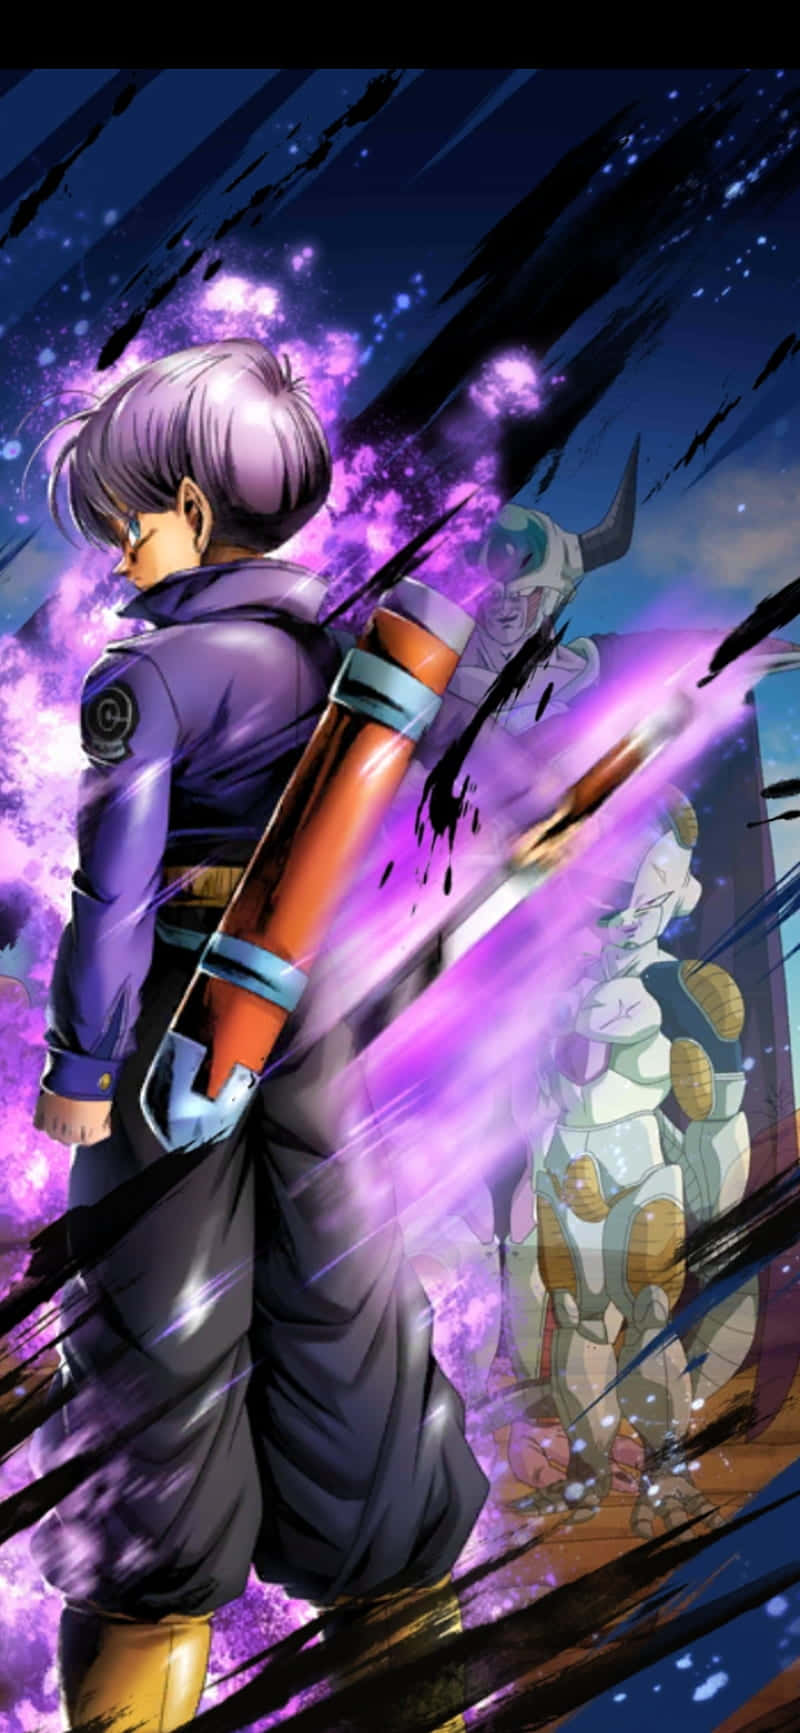 Take control of your day with Trunks Phone Wallpaper